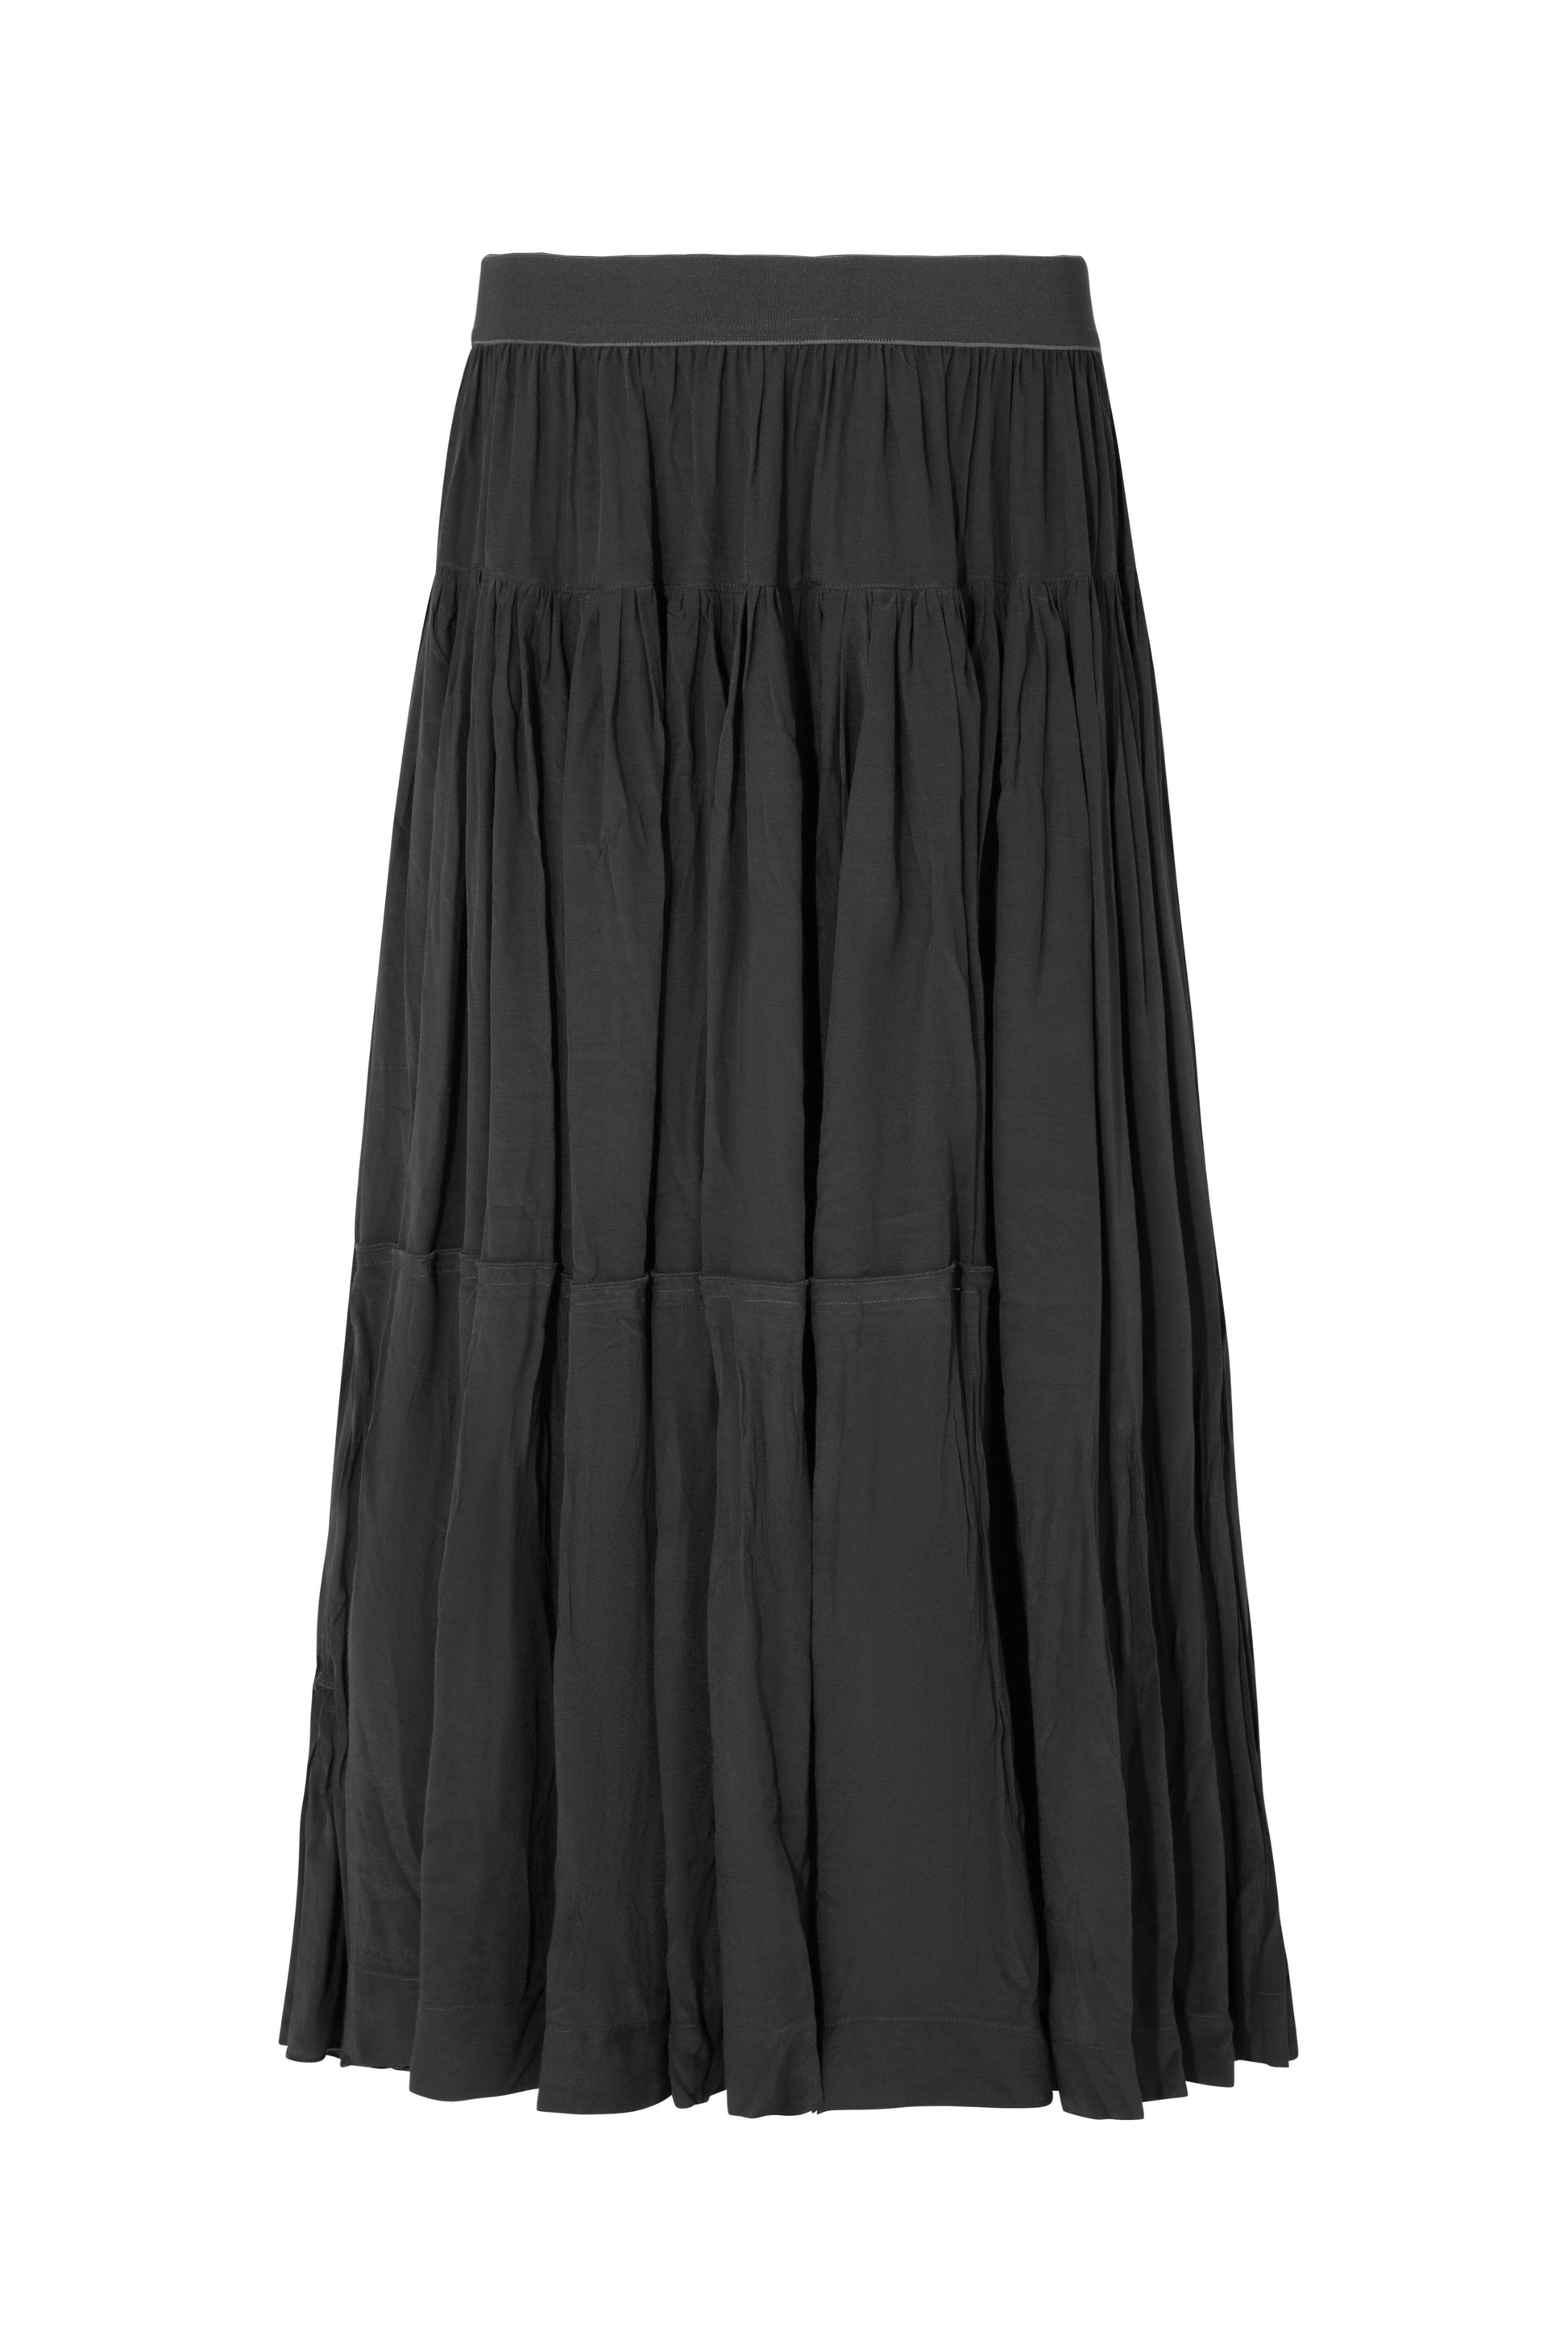 CURATE LITTLE SKIRT TOLD ME SKIRT - BLACK - THE VOGUE STORE